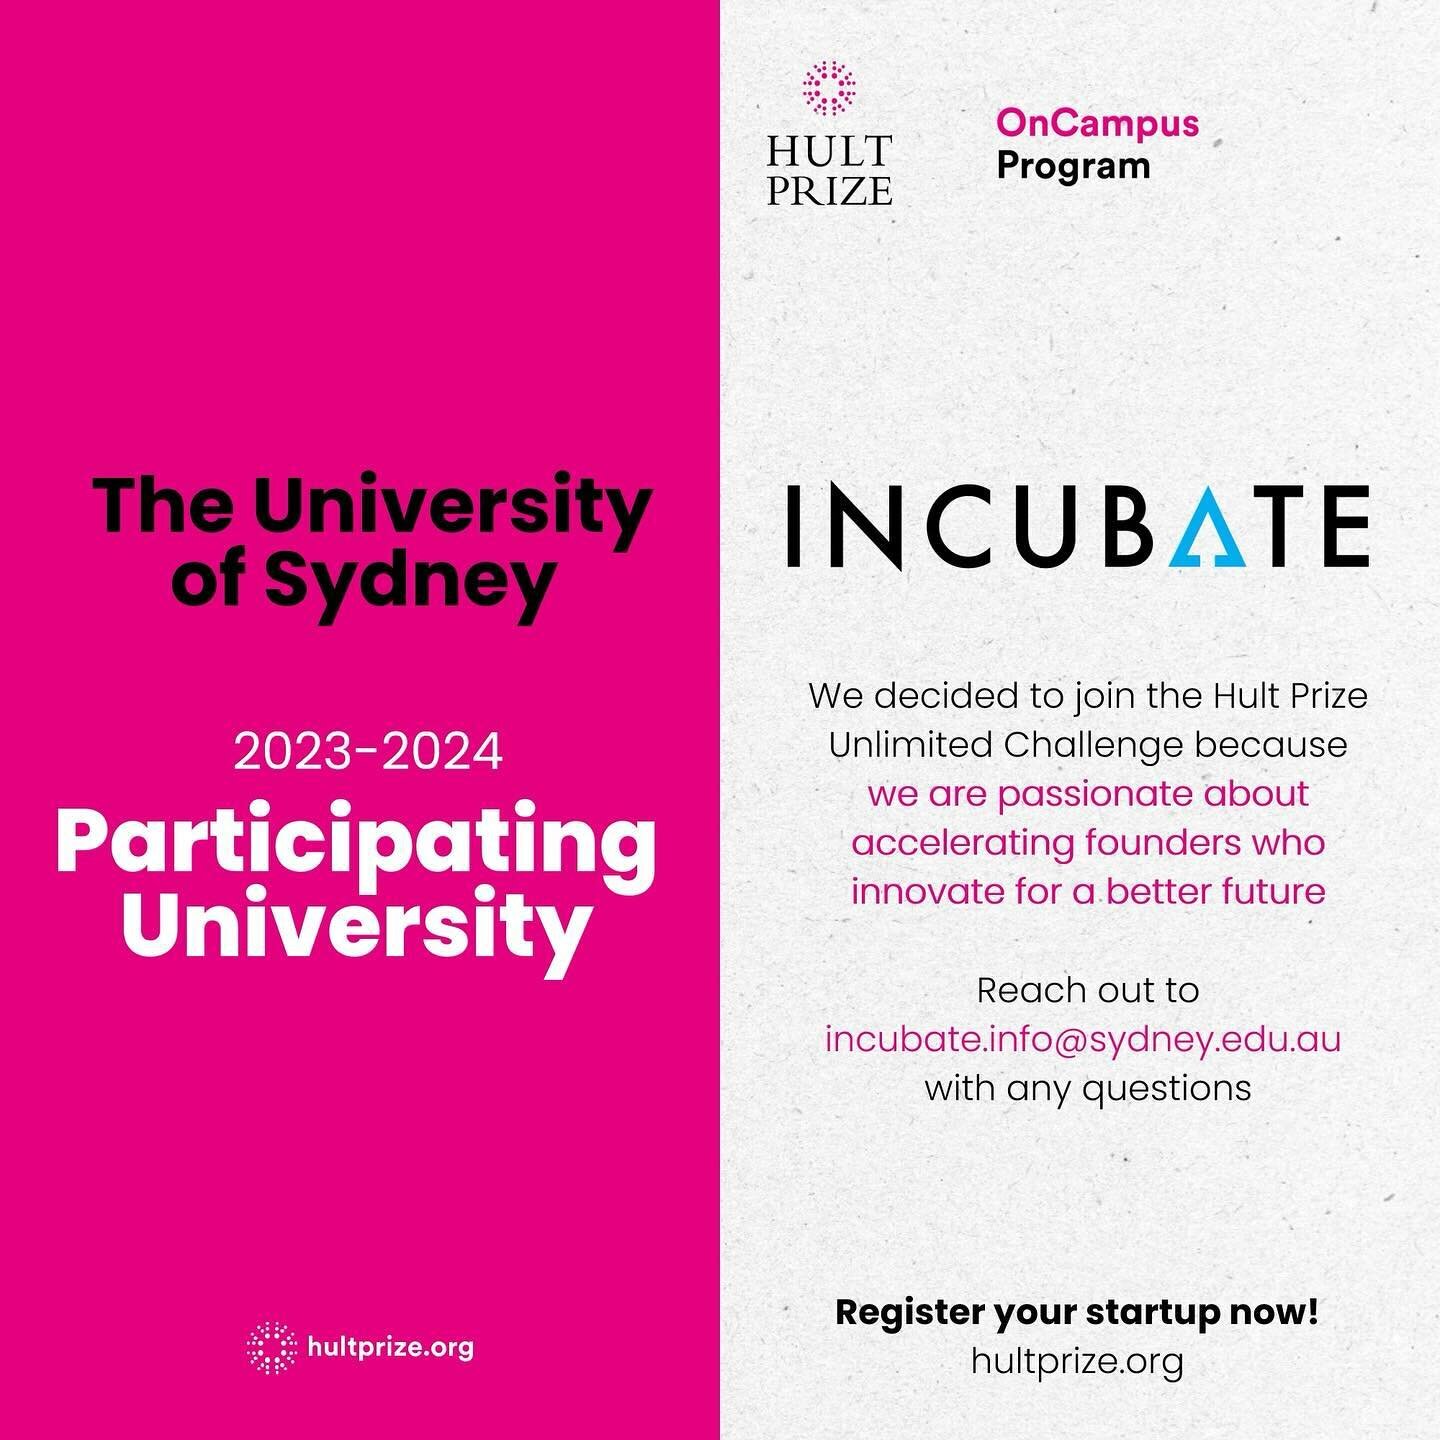 Ready to make your mark? ✨ 

The University of Sydney is proud to announce that we are joining the Hult Prize Unlimited Challenge! Don&rsquo;t miss this incredible opportunity to change the world and compete for a shot at $1 million in funding, joini